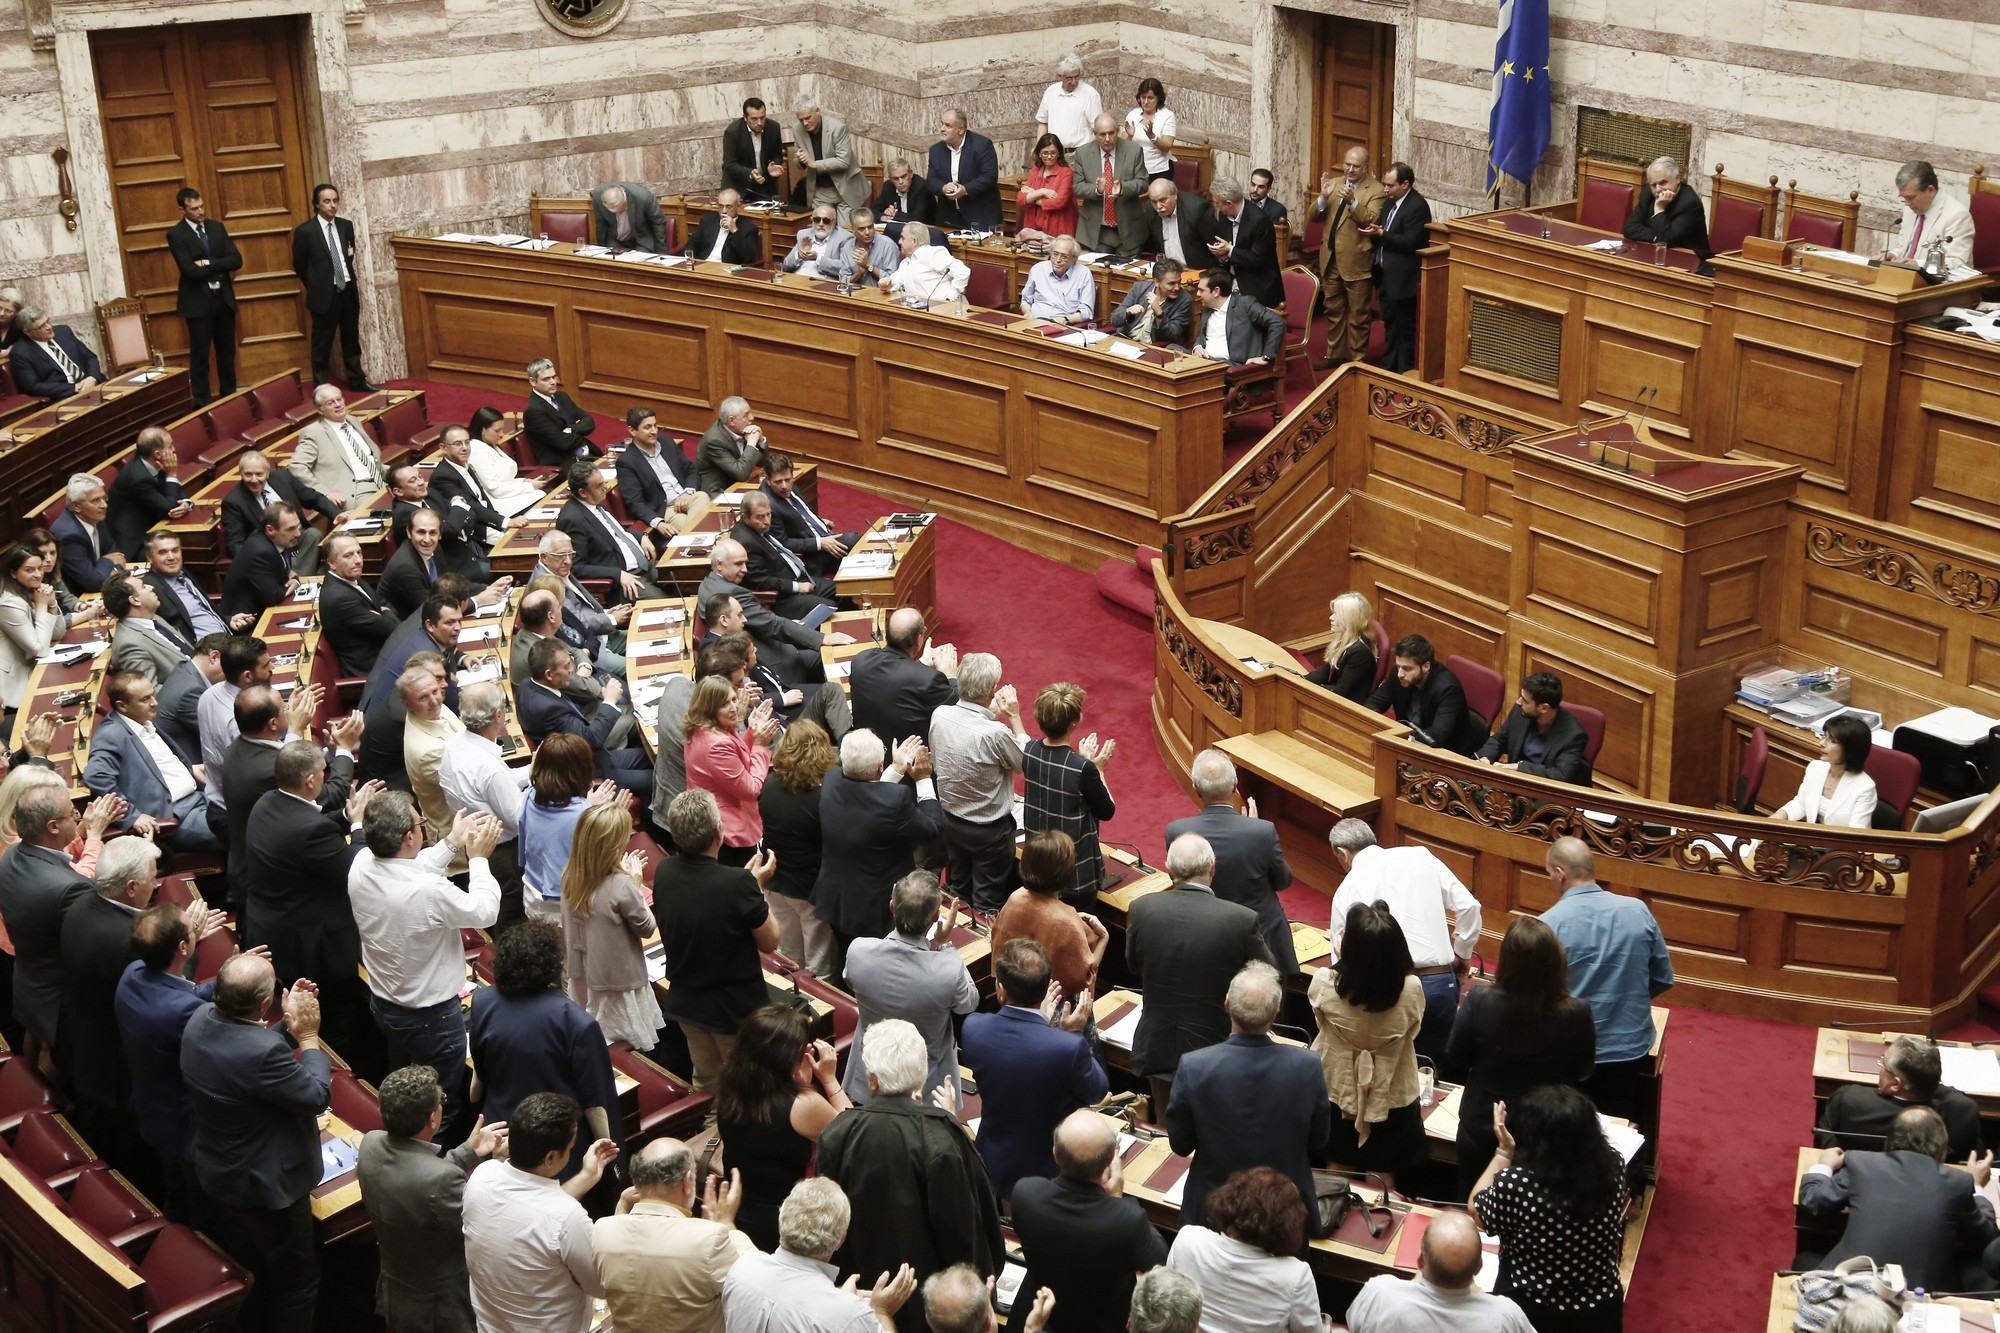 Debate and vote on the draft law of the agreement with Greece's